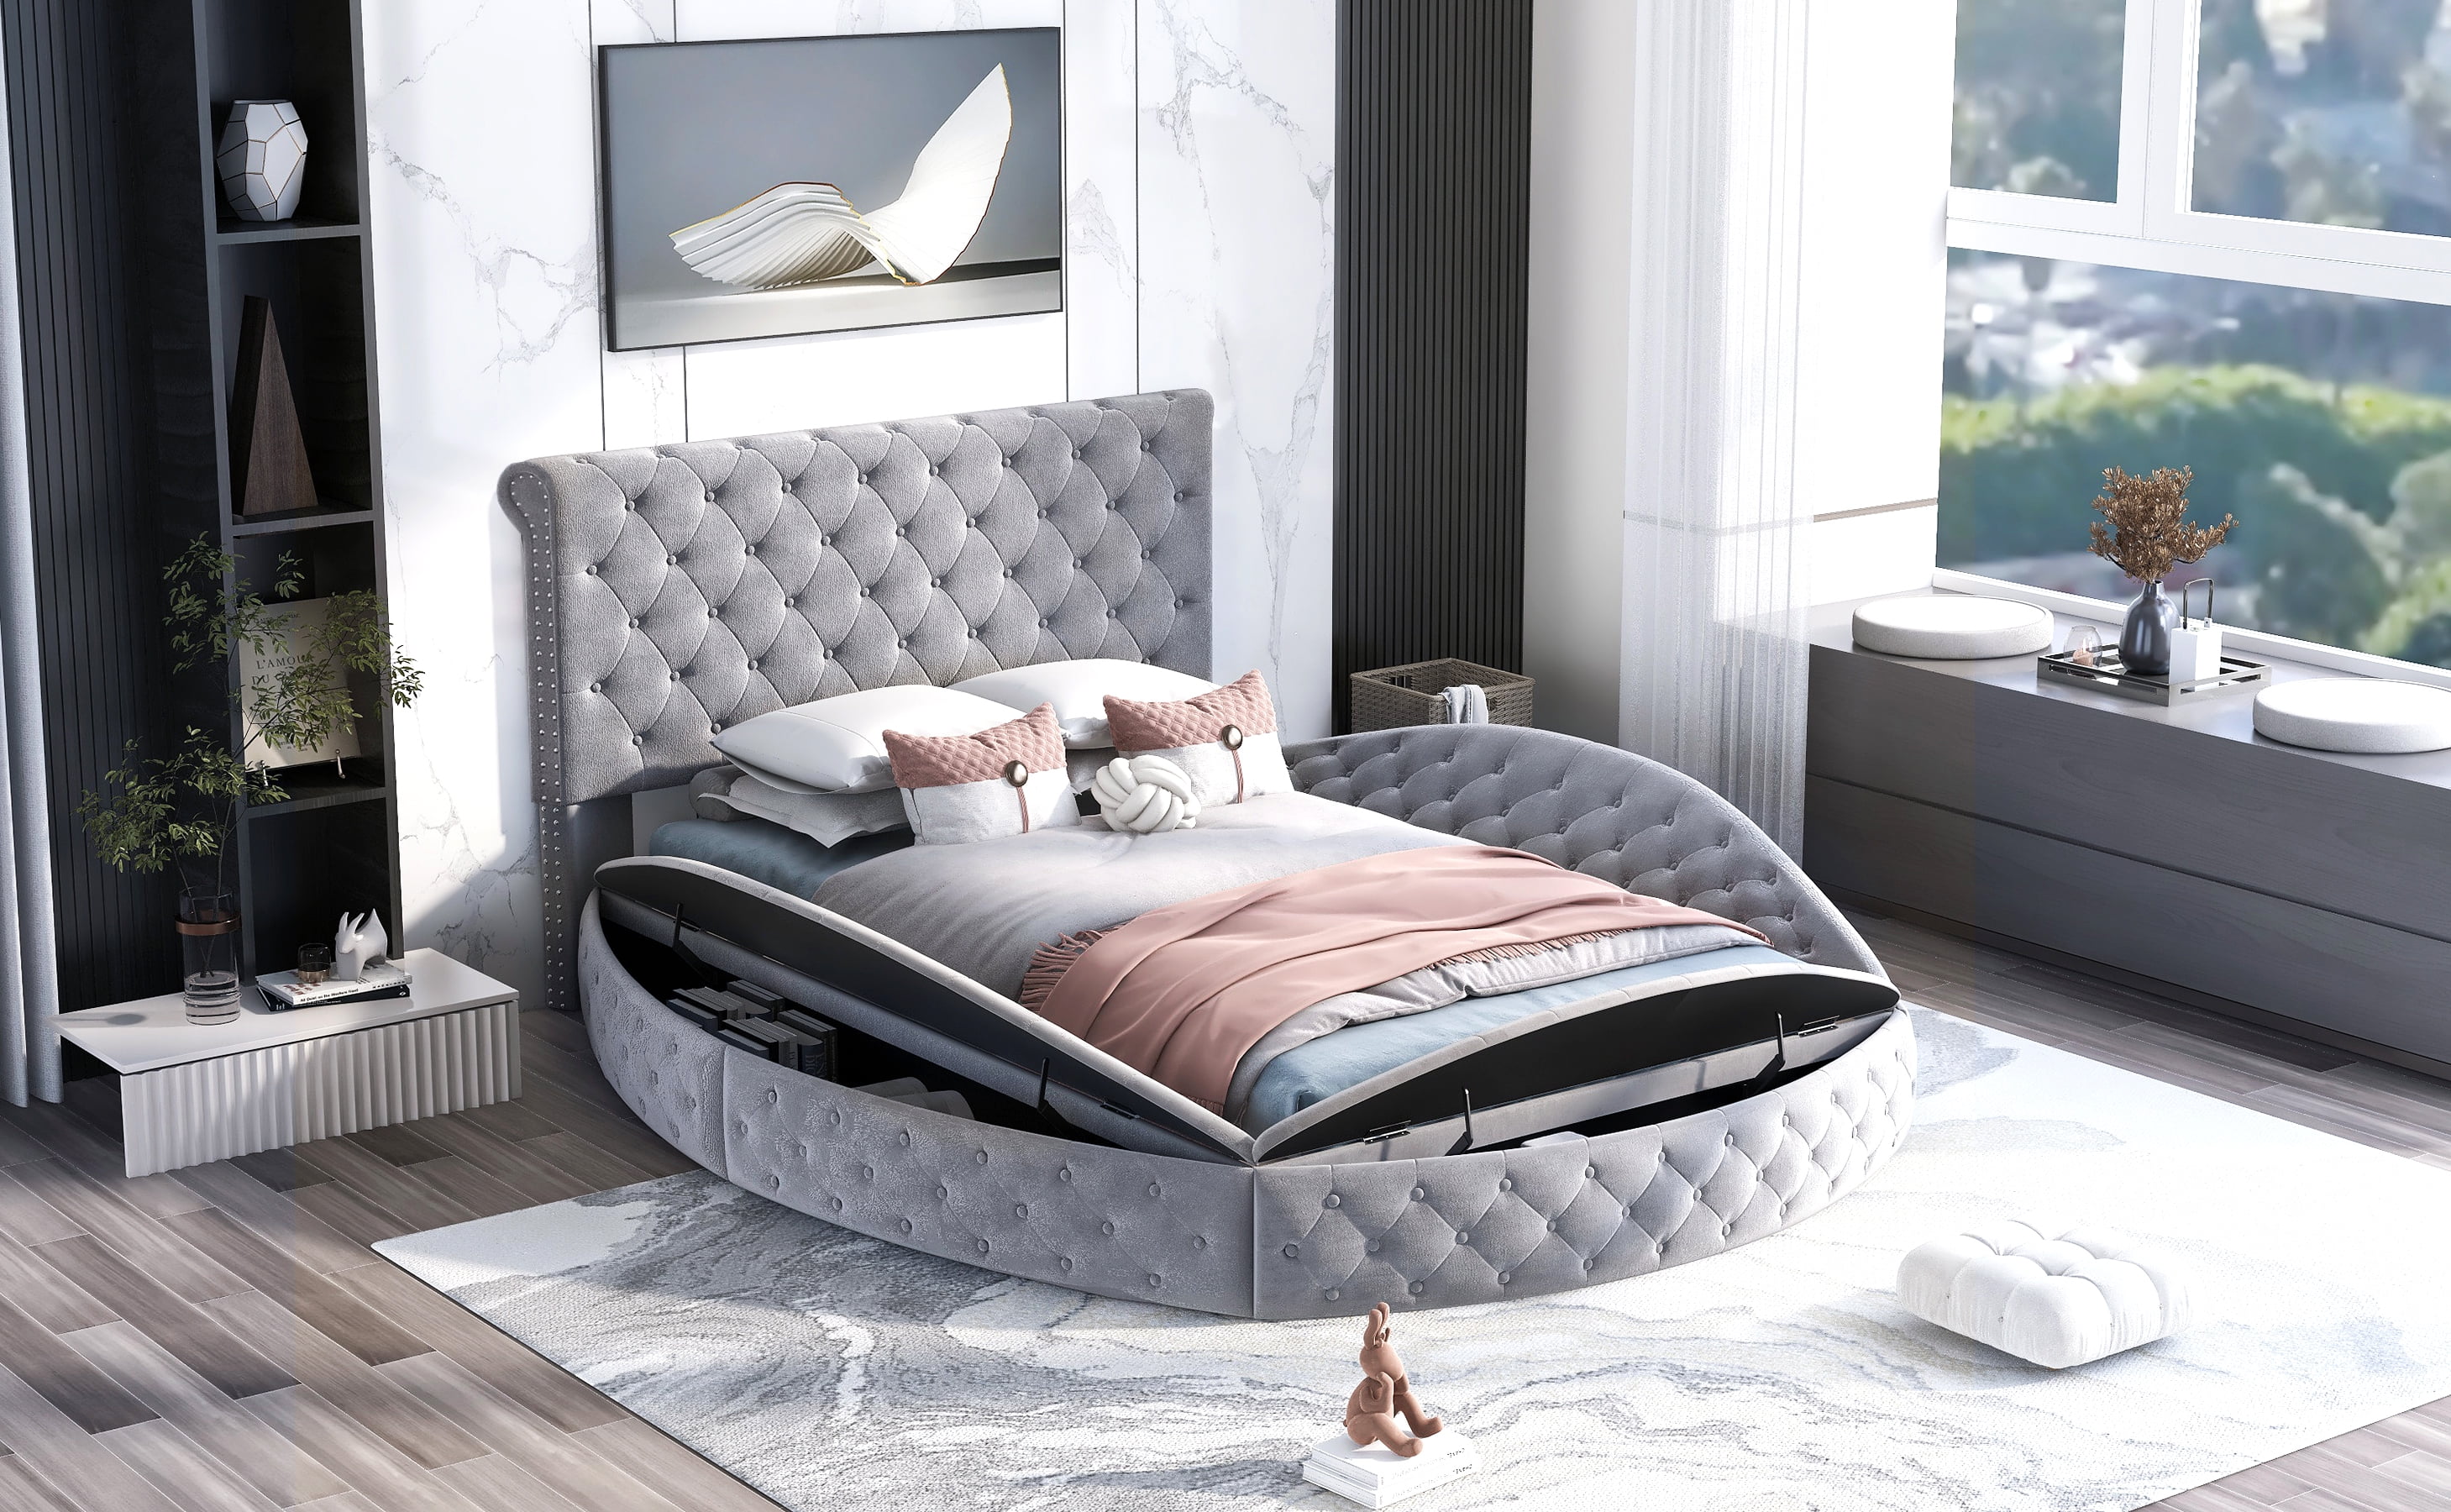 Kruipen regisseur Vies EUROCO Full Size Round Bed, Upholstery Low Profile Storage Platform Bed  with Storage Space on Both Sides, Tufted and Soft Velvet Headborad for Kids  Living Room, Gray - Walmart.com